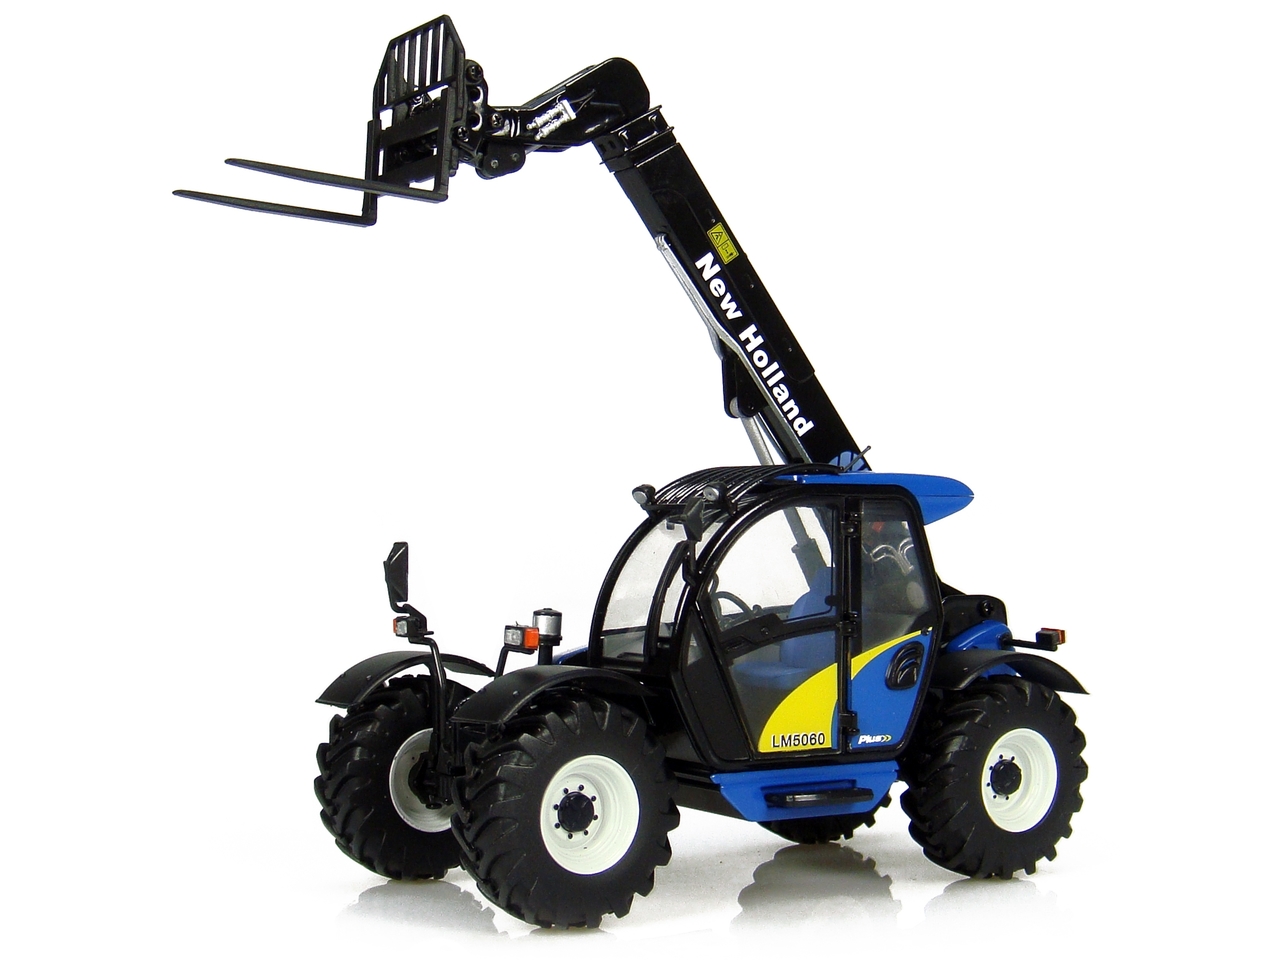 New Holland Lm5060 Telescopic Handler With Fork 1/32 Diecast Model By Universal Hobbies